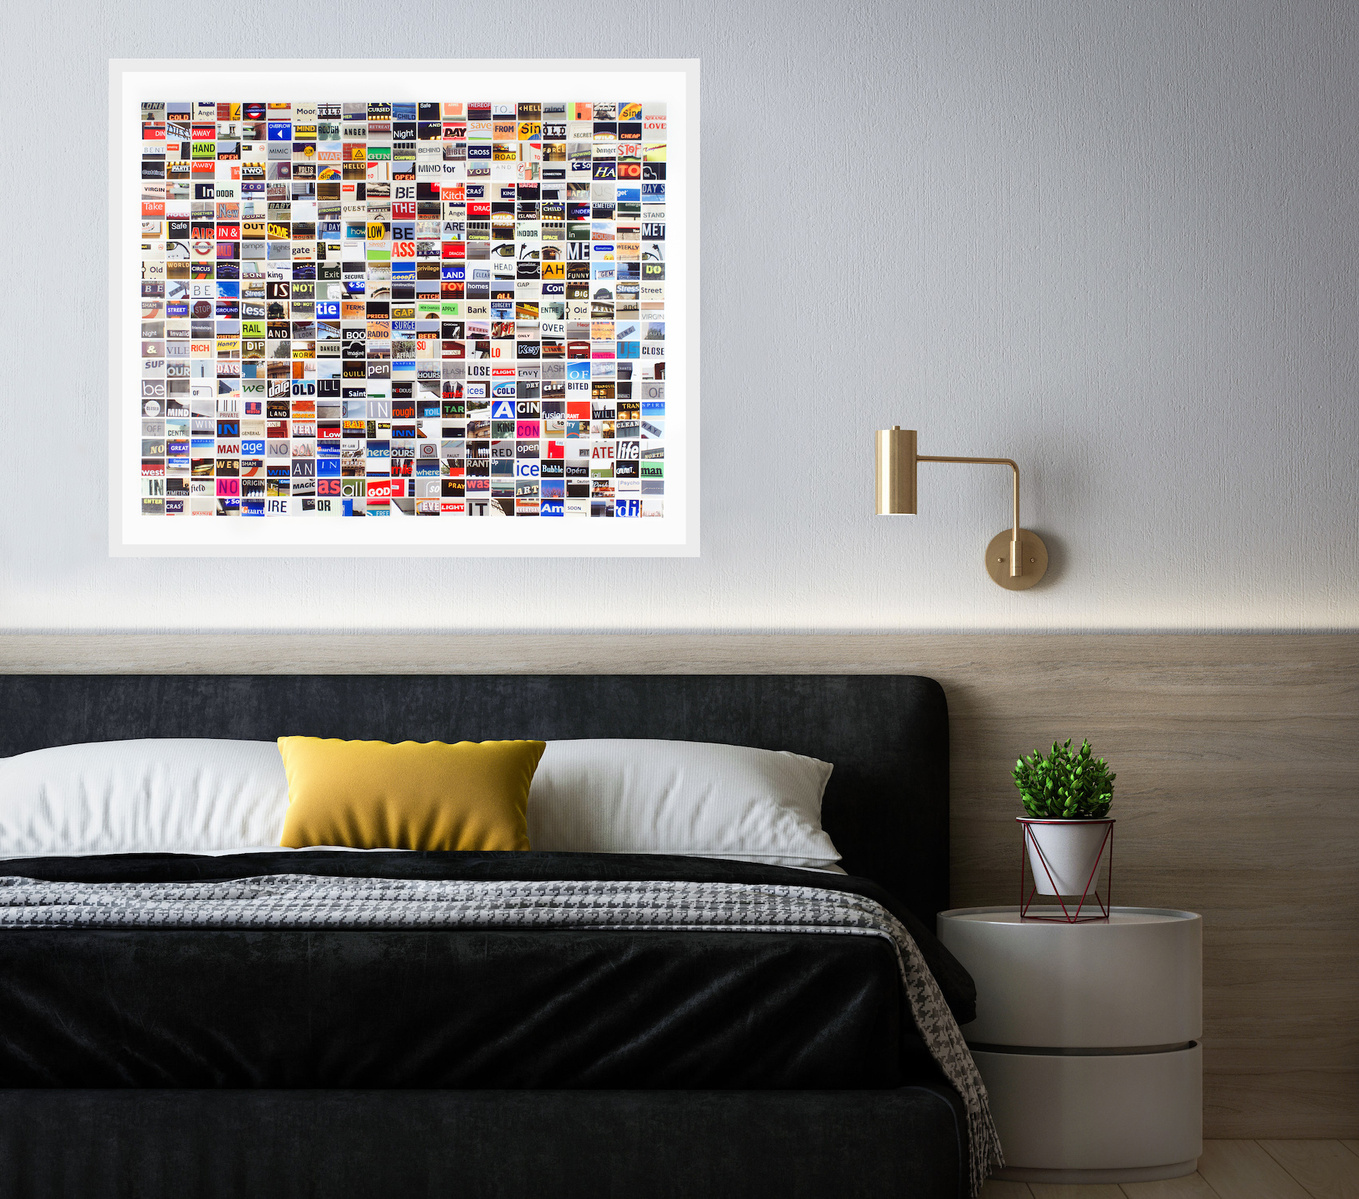 In-situ contemporary art in a bedroom. Lone Cold Angel - photographic grid of hand cut prints of street signage words by visual artist Diane Allison HALLISON Studios Tasmania.  Colourful grid of words is a type of narrative, concrete poetry, poem, prose.